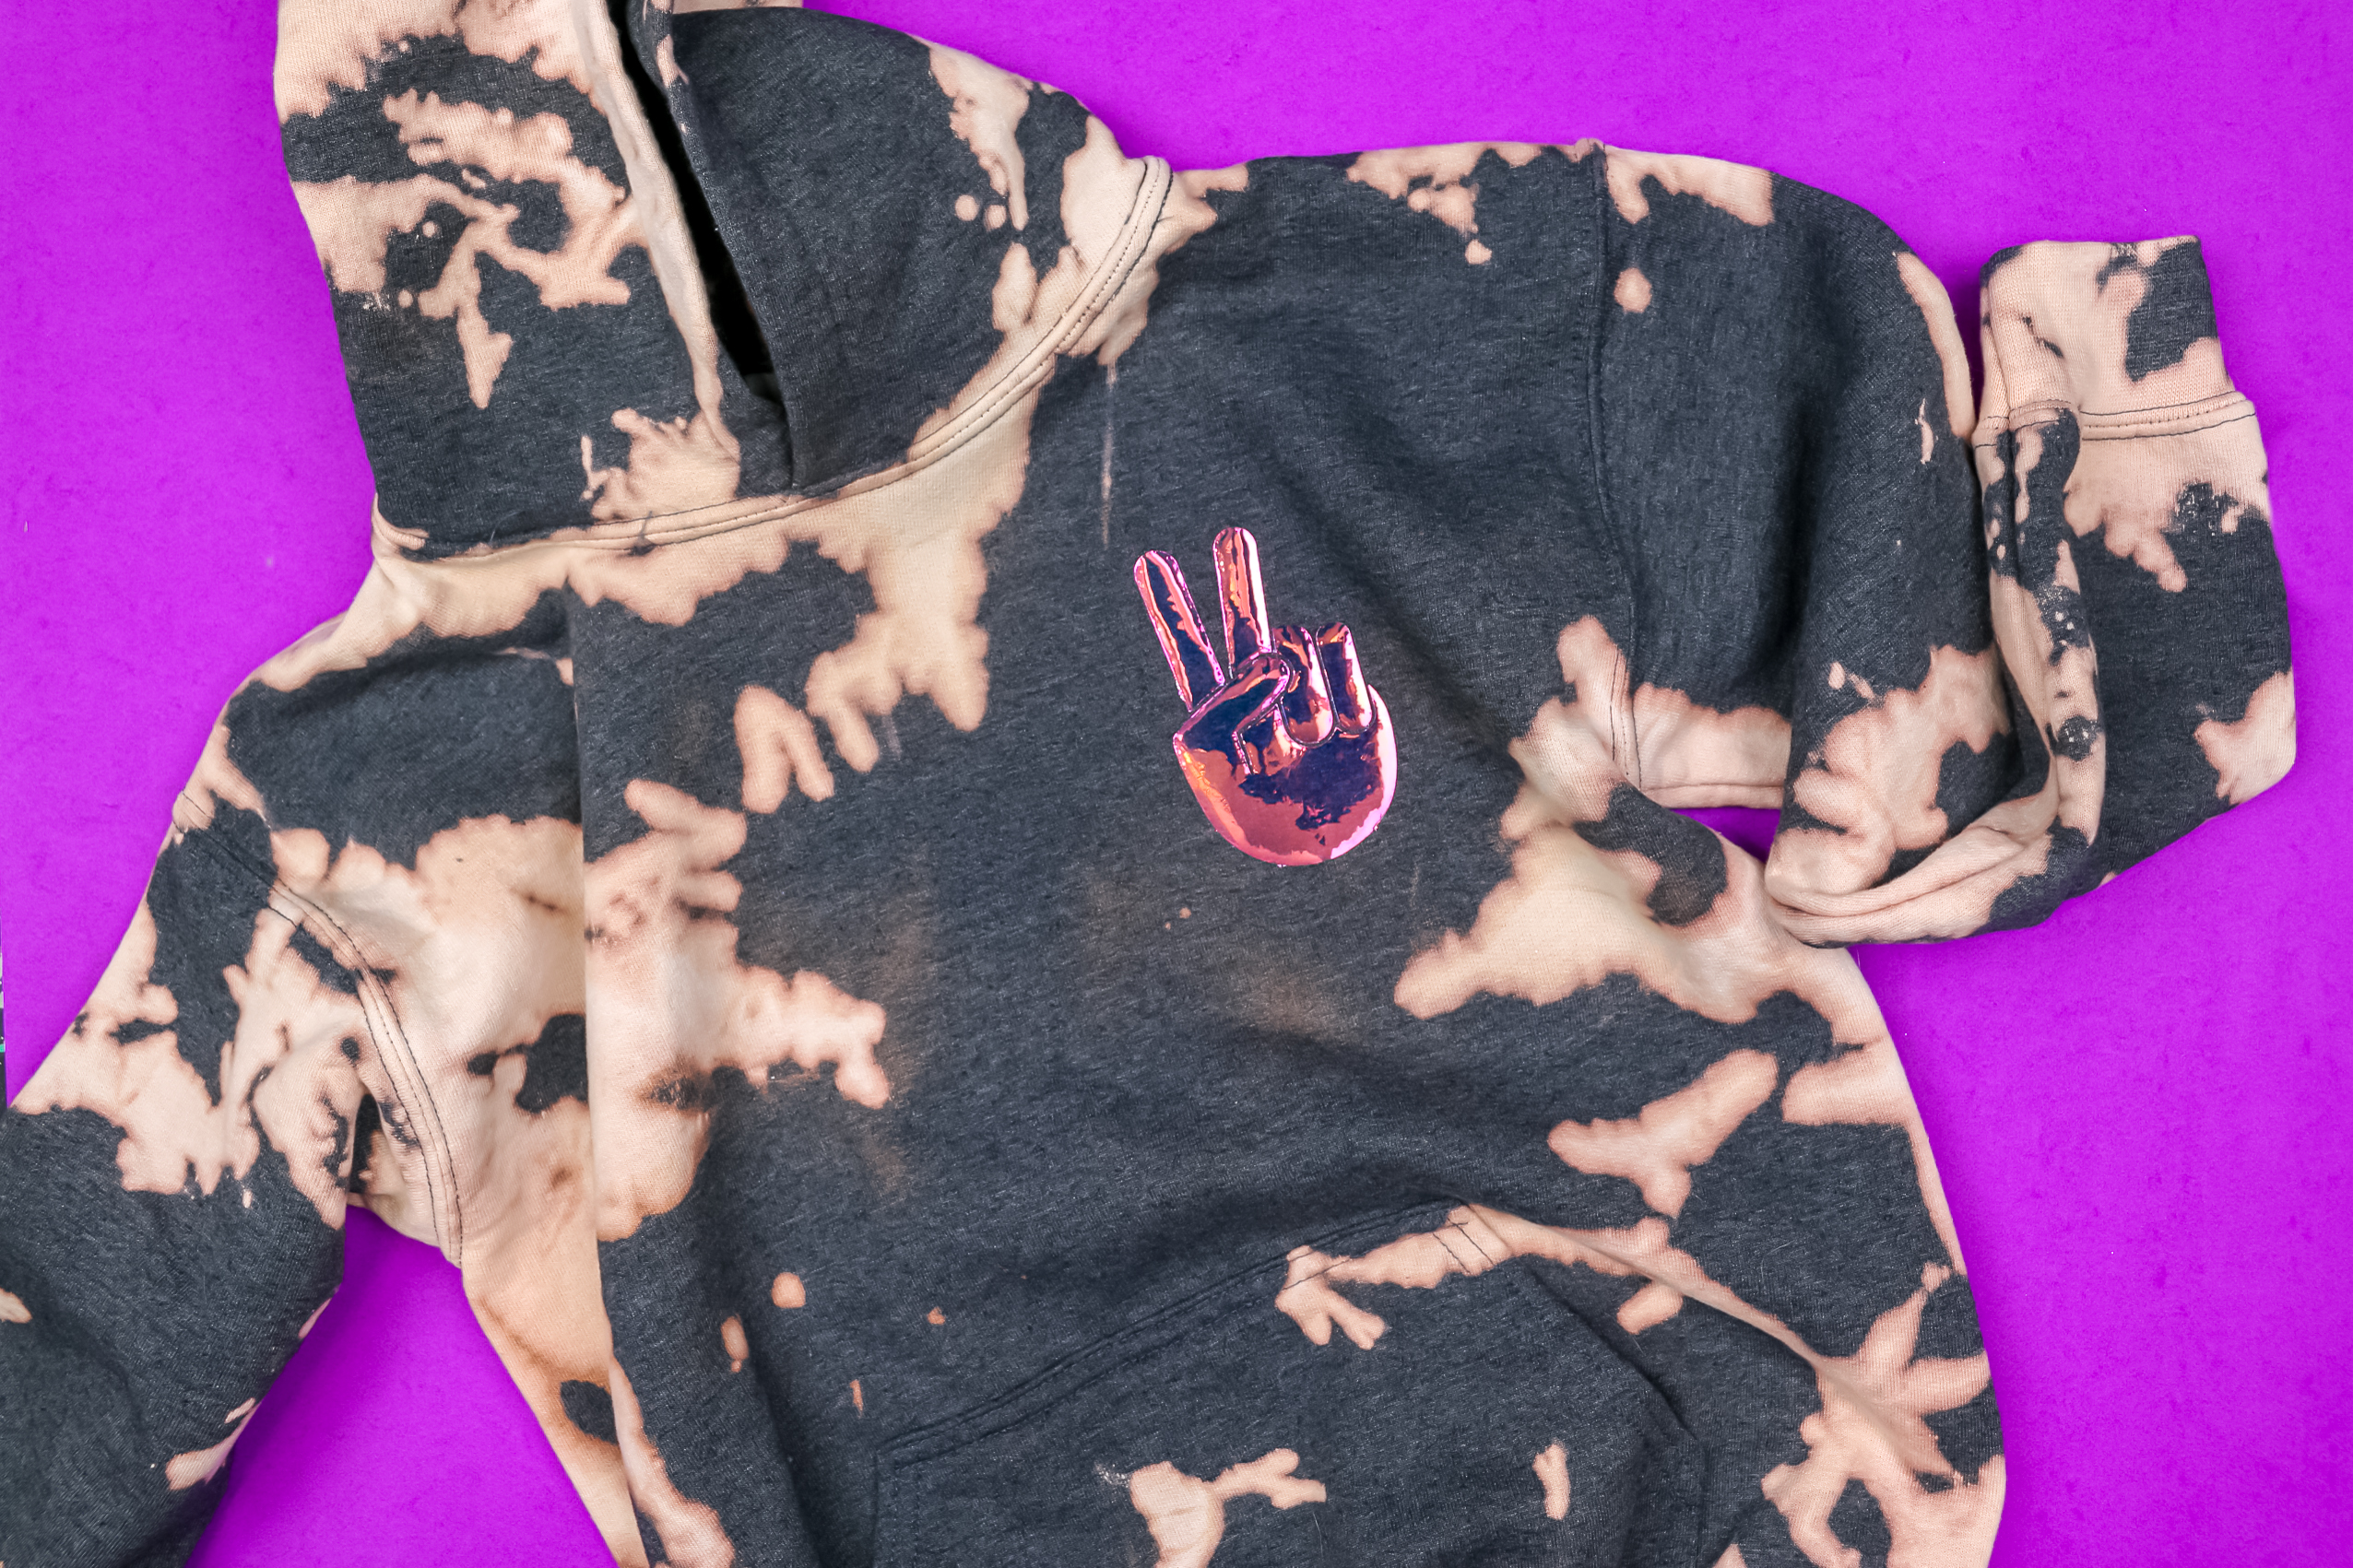 holographic iron on vinyl cut into a peace sign on a sweatshirt